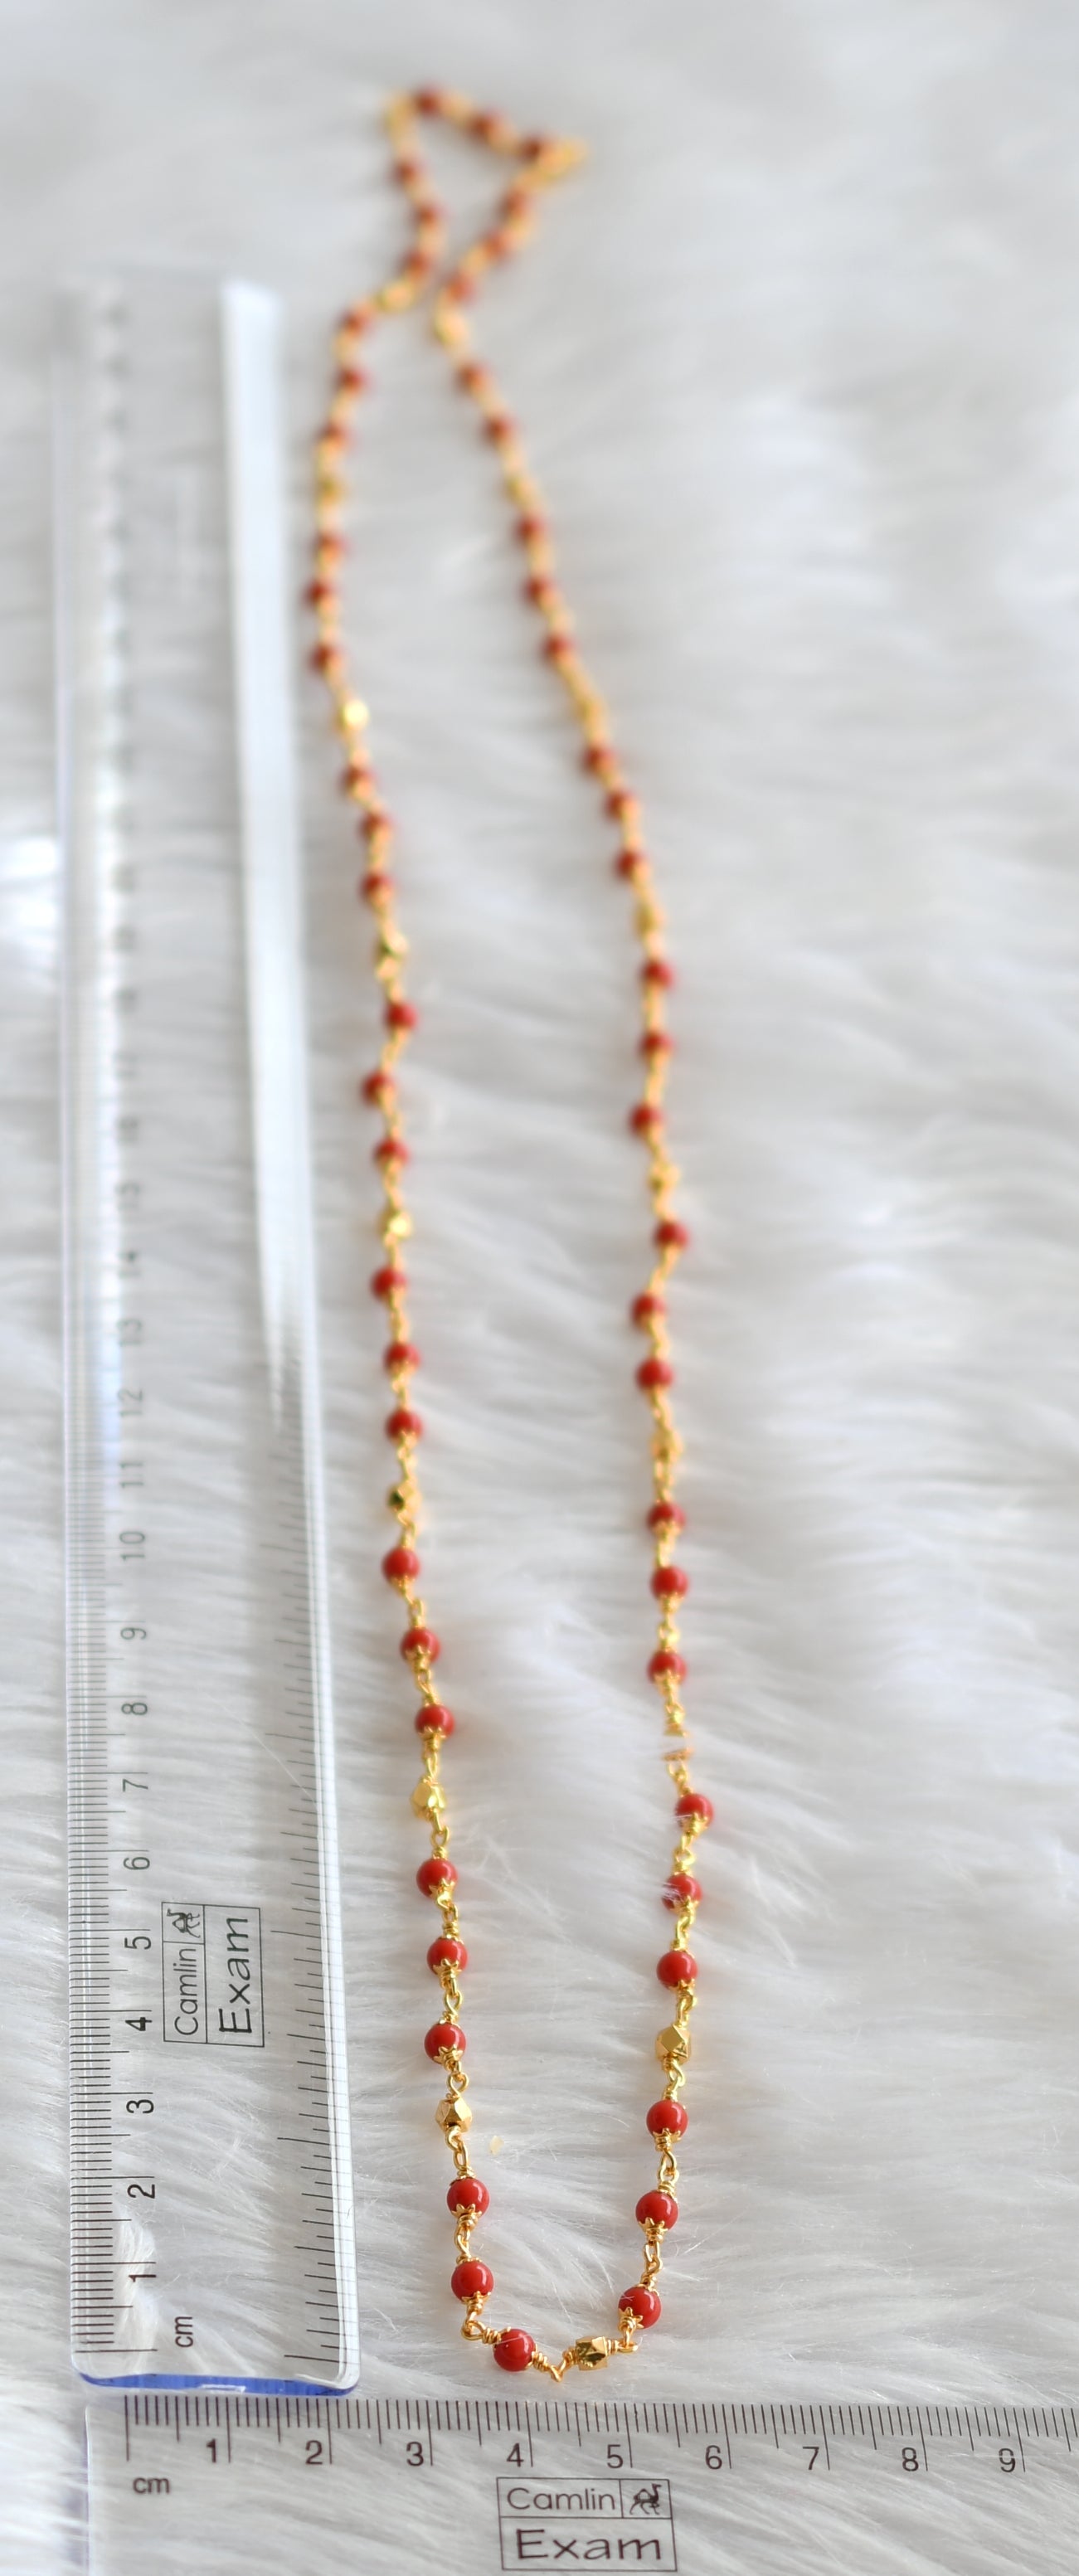 Gold tone coral beads chain dj-38576